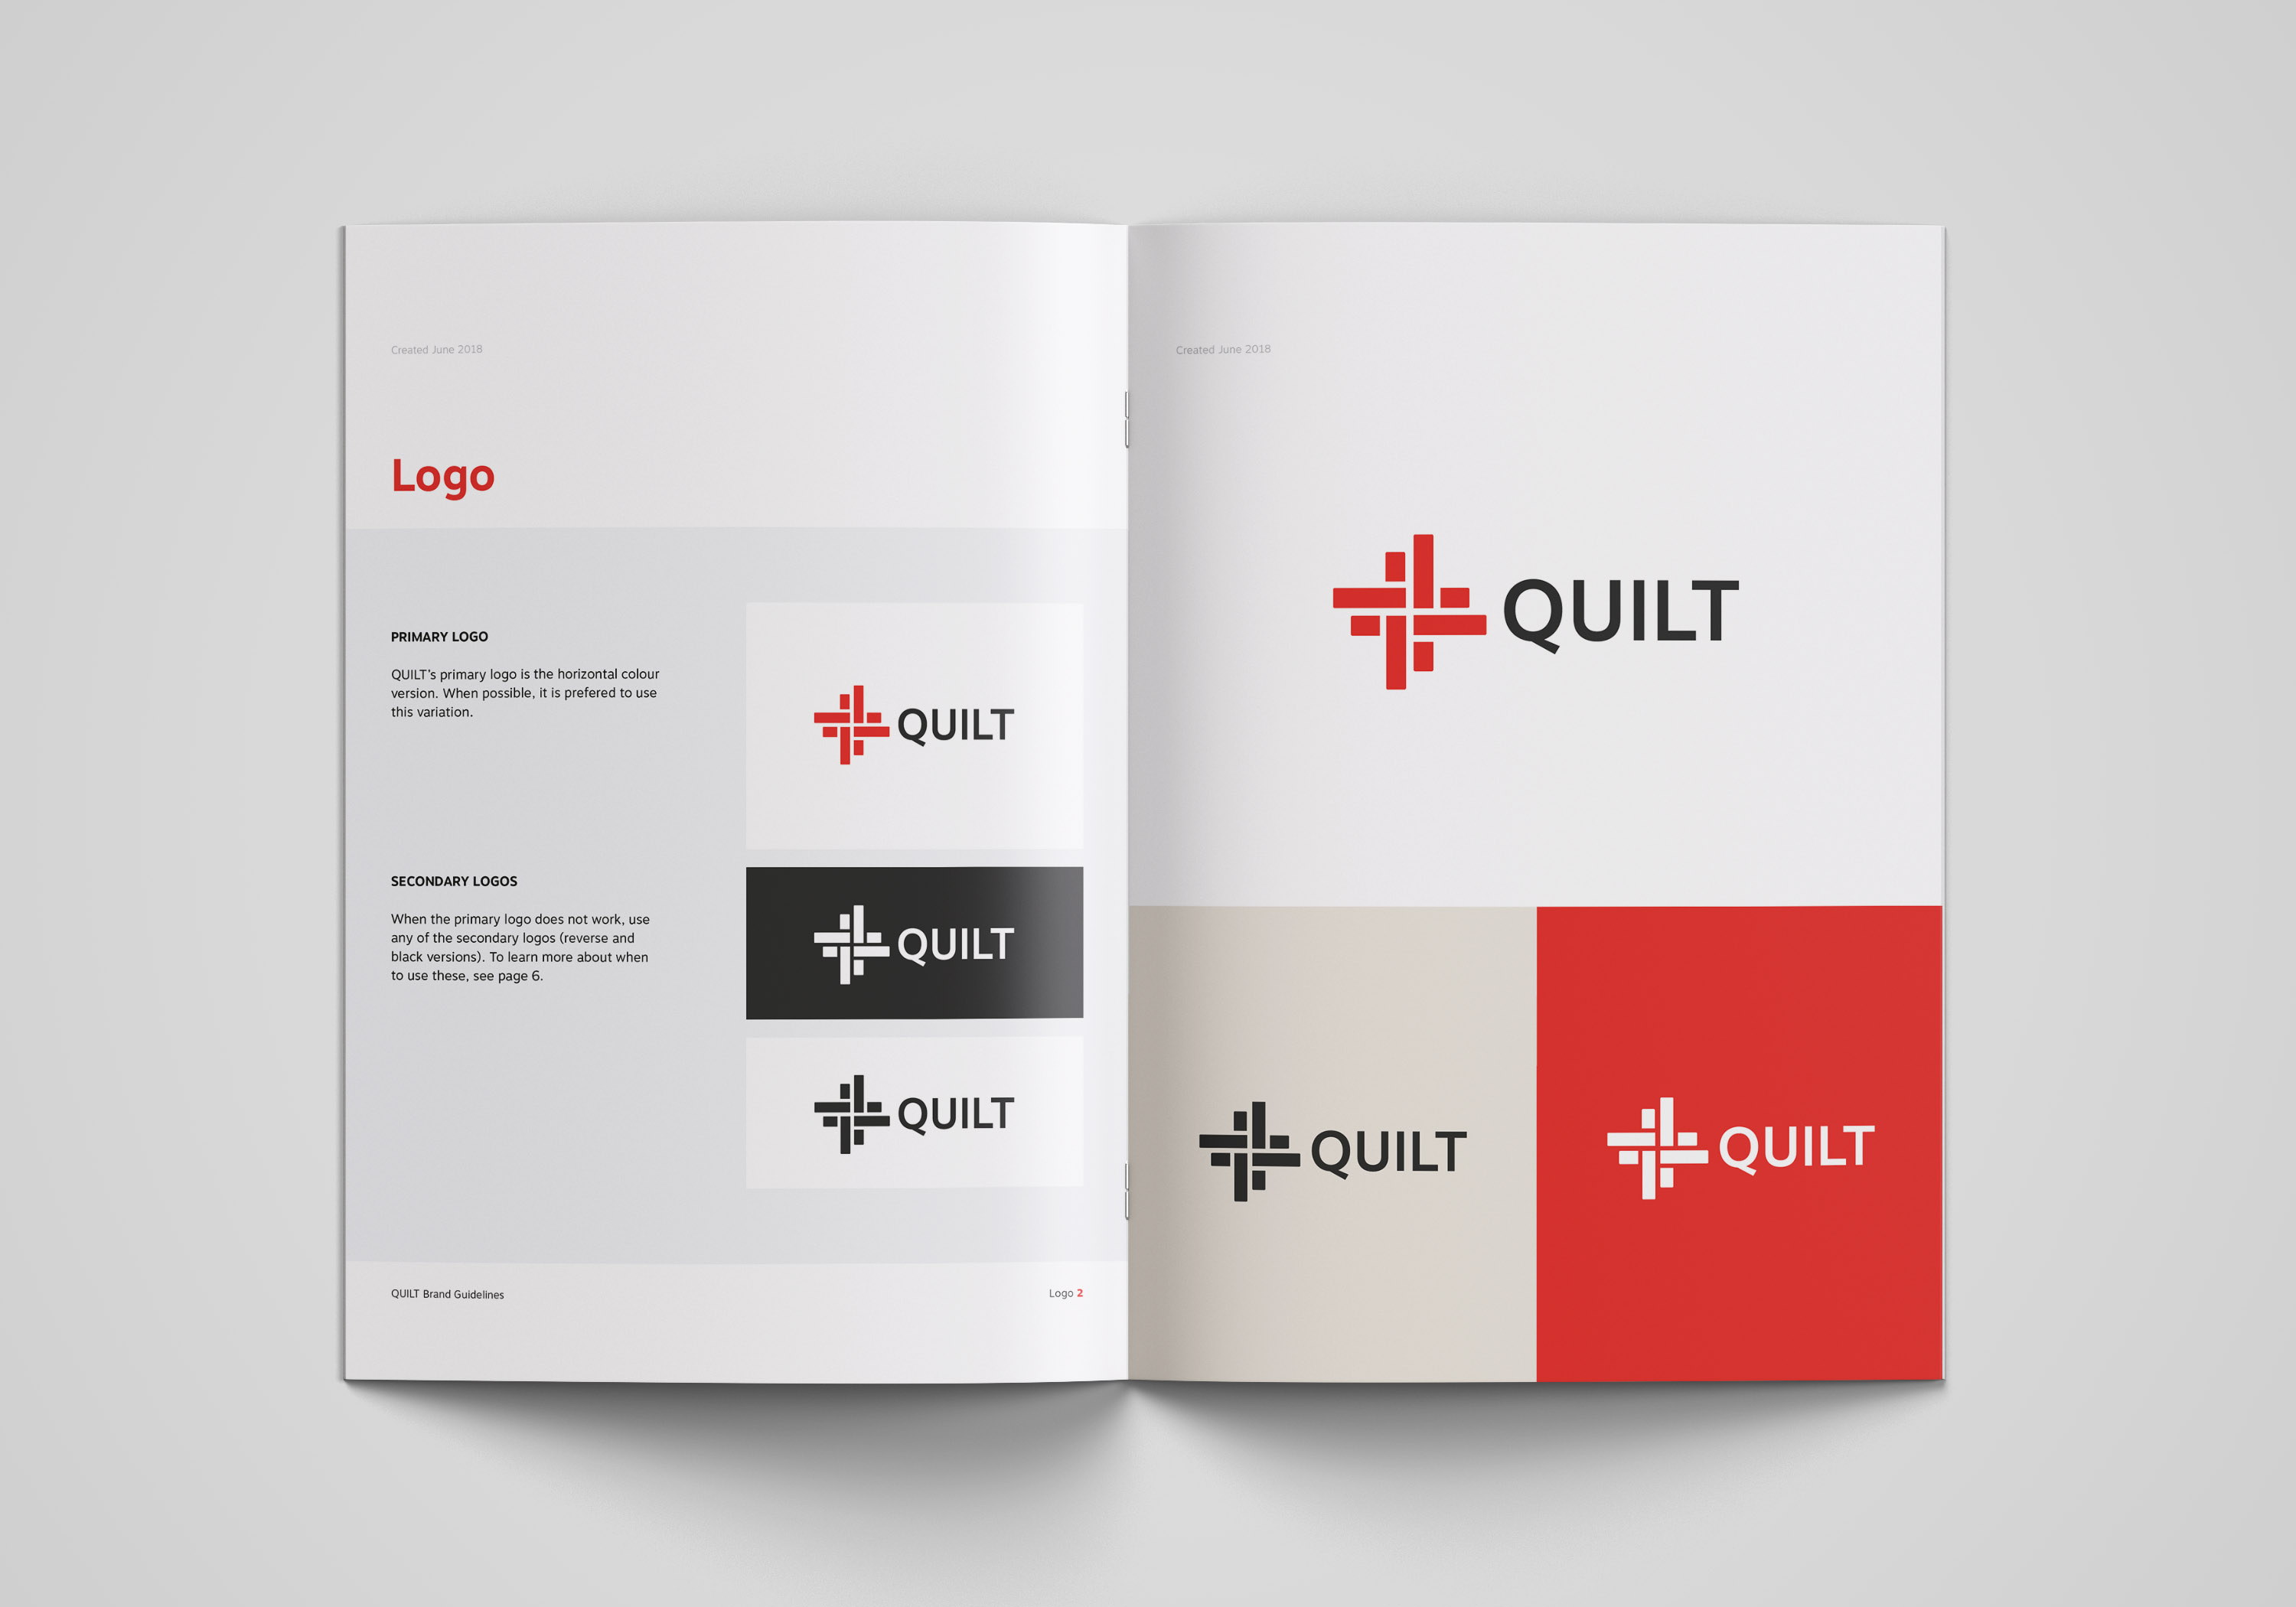 Branding guidelines spread about the different available logos.